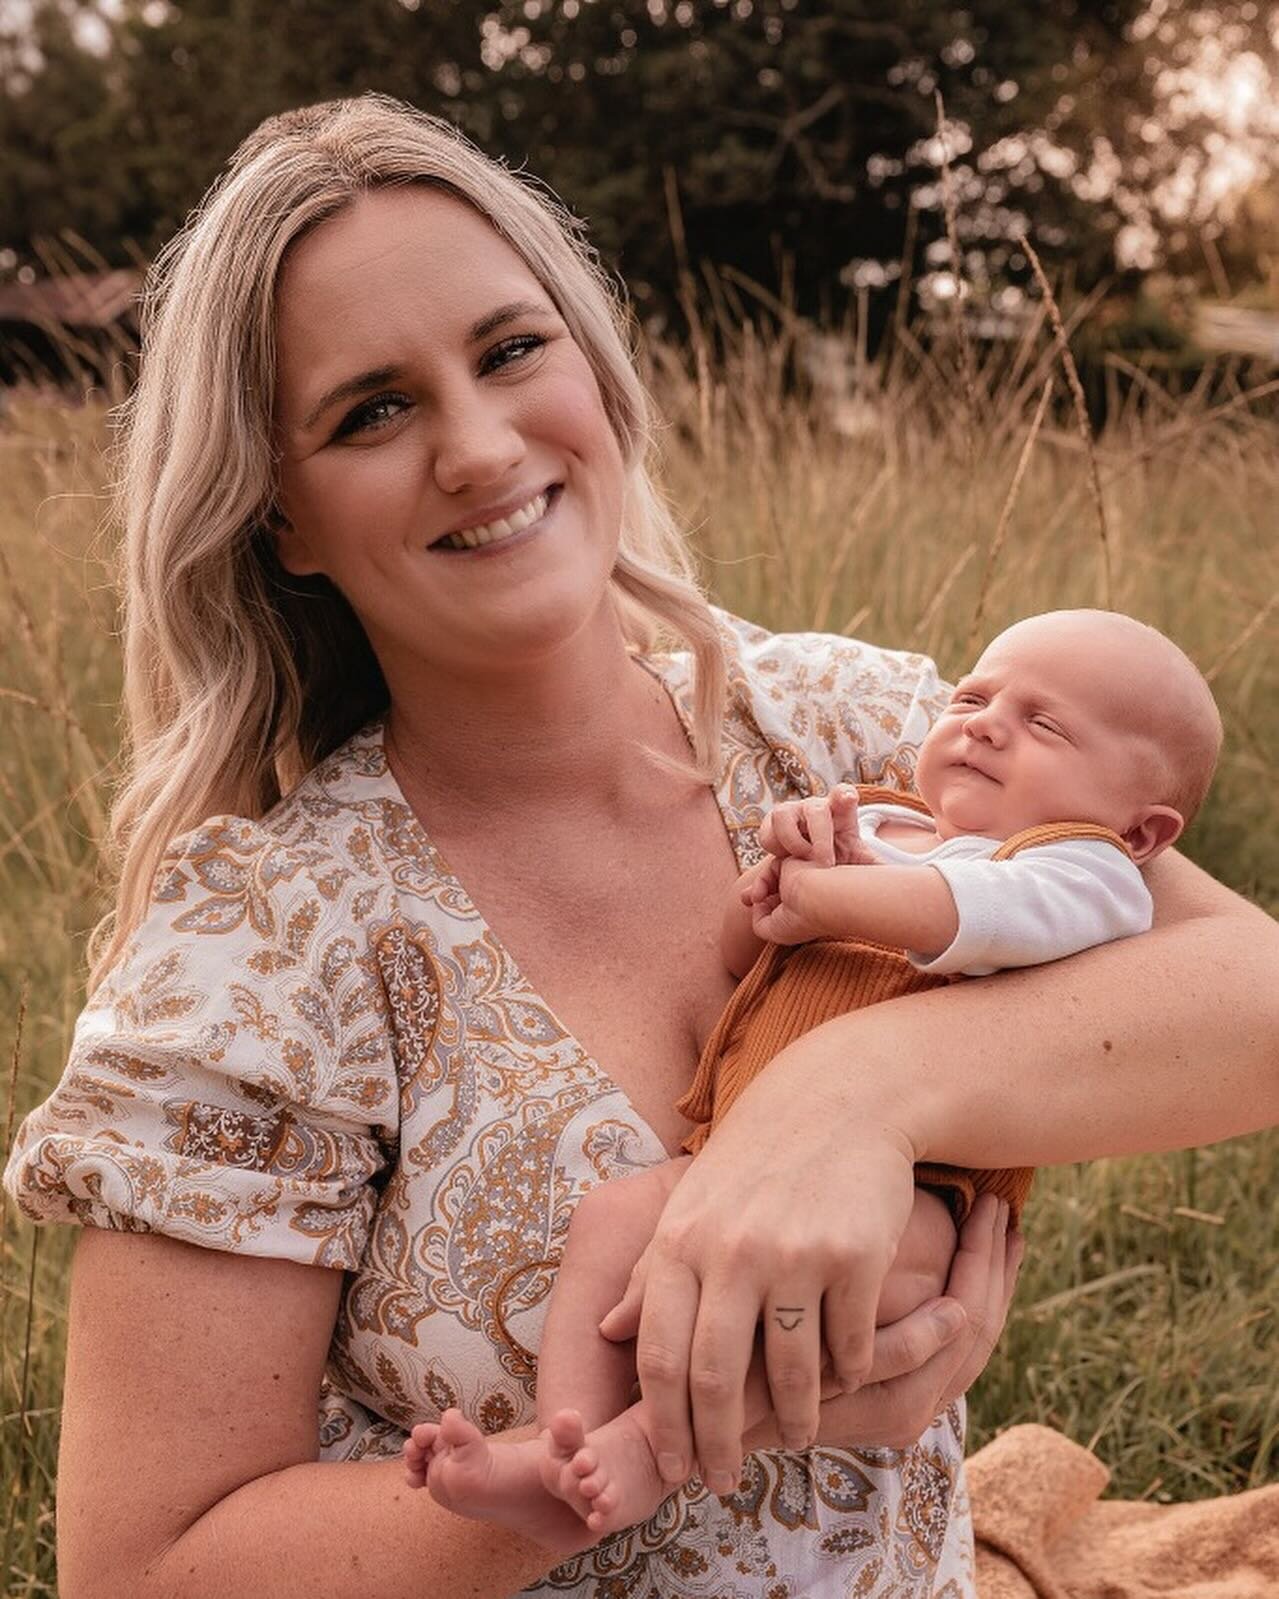 👋 Meet Maddie &ndash; this amazing mum who during her pregnancy attended our Pregnancy Exercise Class and weekly strength training with Mel, our Women&rsquo;s Health Physiotherapist&nbsp;
⭐️ 
Here&rsquo;s what Maddie had to say about her time ⬇️
&ld